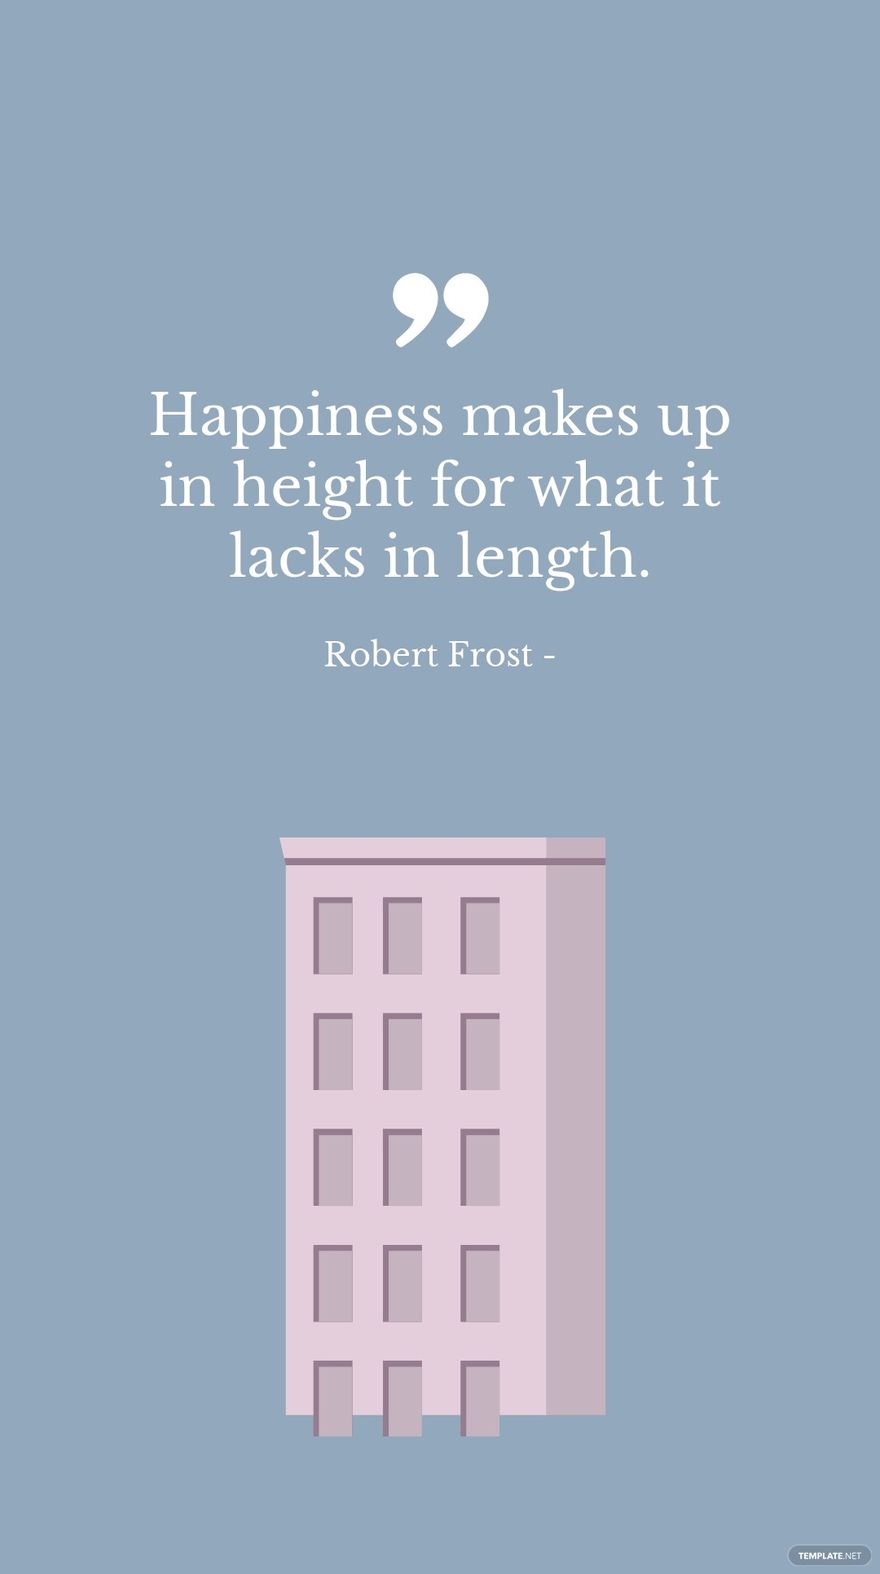 Robert Frost - Happiness makes up in height for what it lacks in length. in JPG